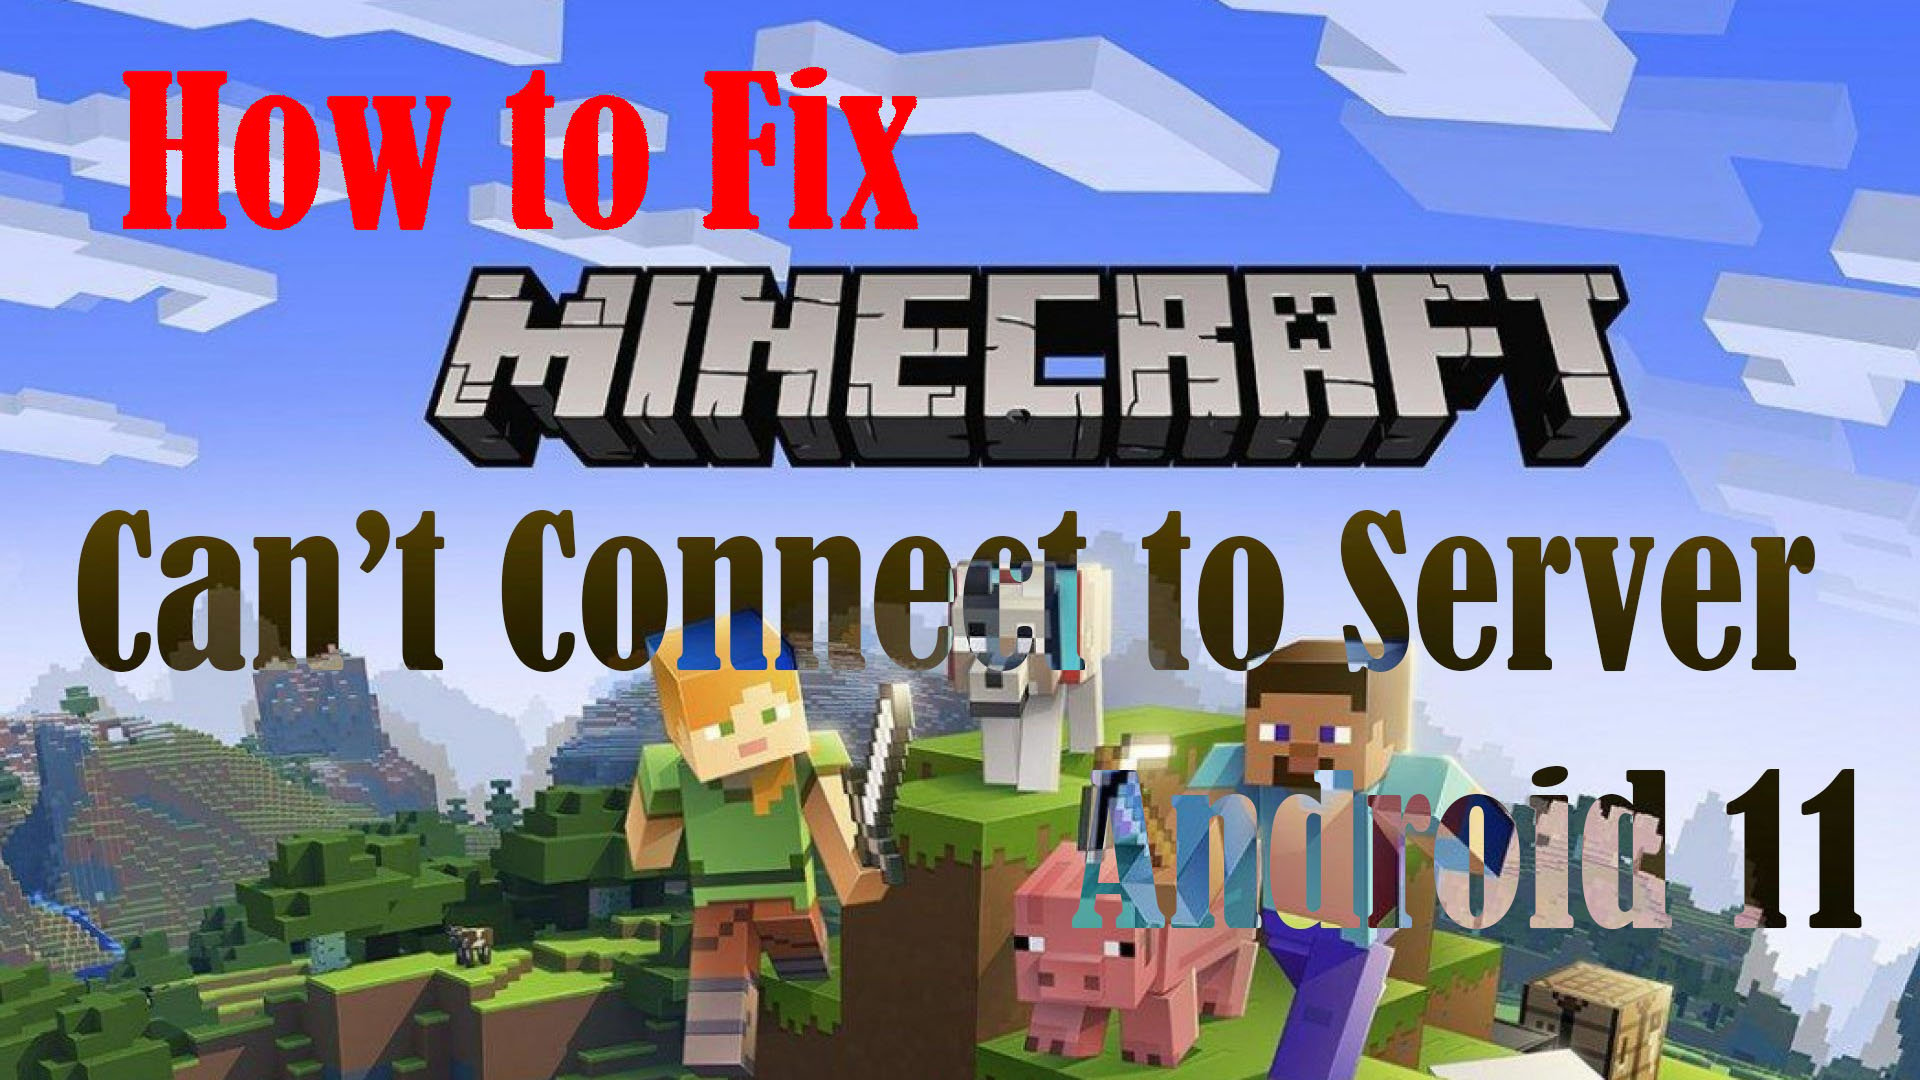 networking - Can't connect to ONE Minecraft server but to others I can -  Arqade